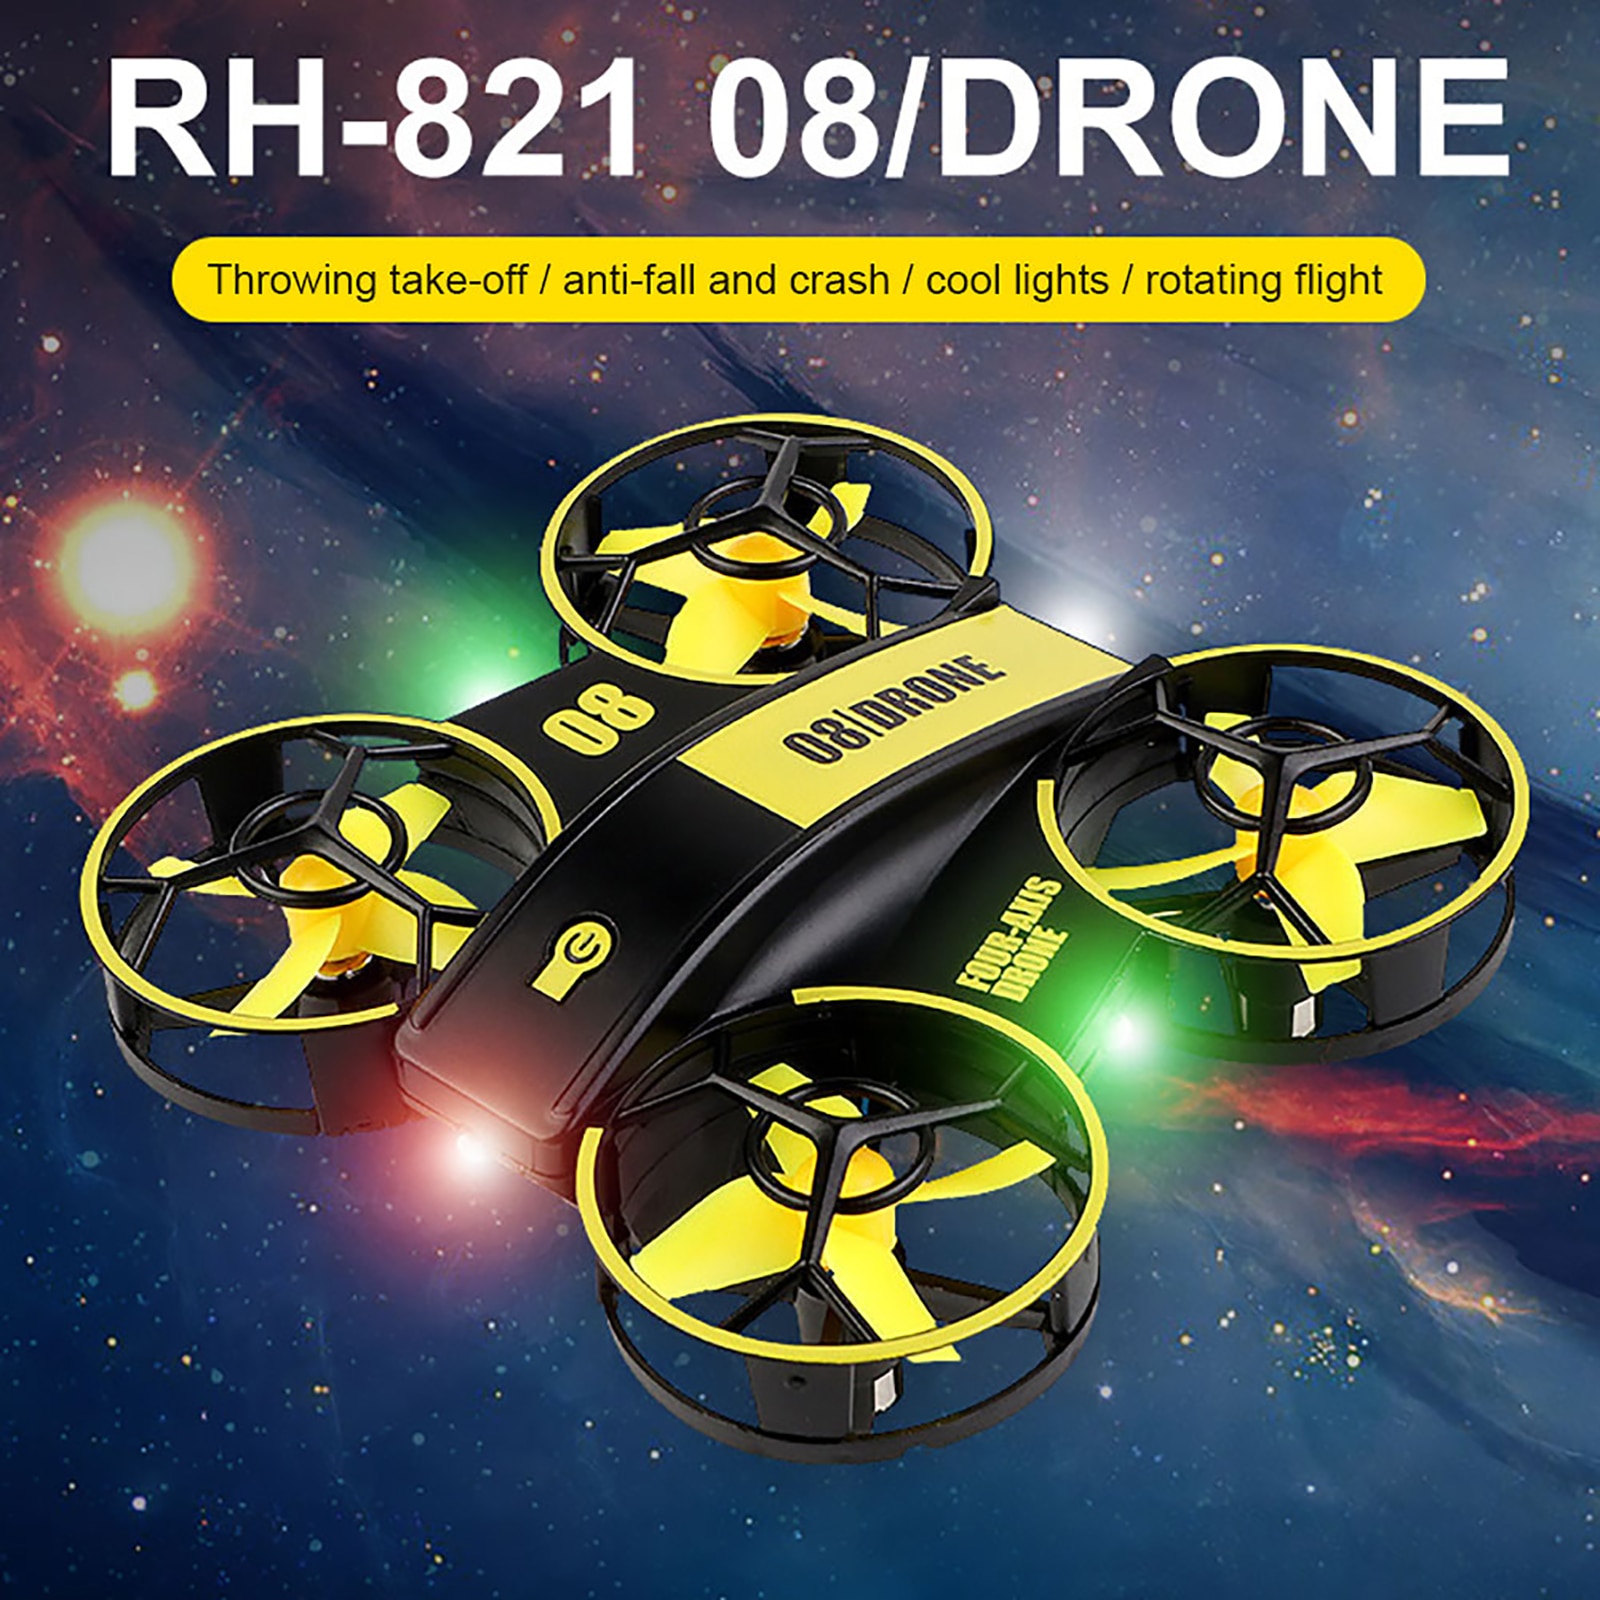 JJRC RH821 Flip Mini RC Drone Helicopter Altitude Hold Remote Control Quadcopter Kids Toys with Lights